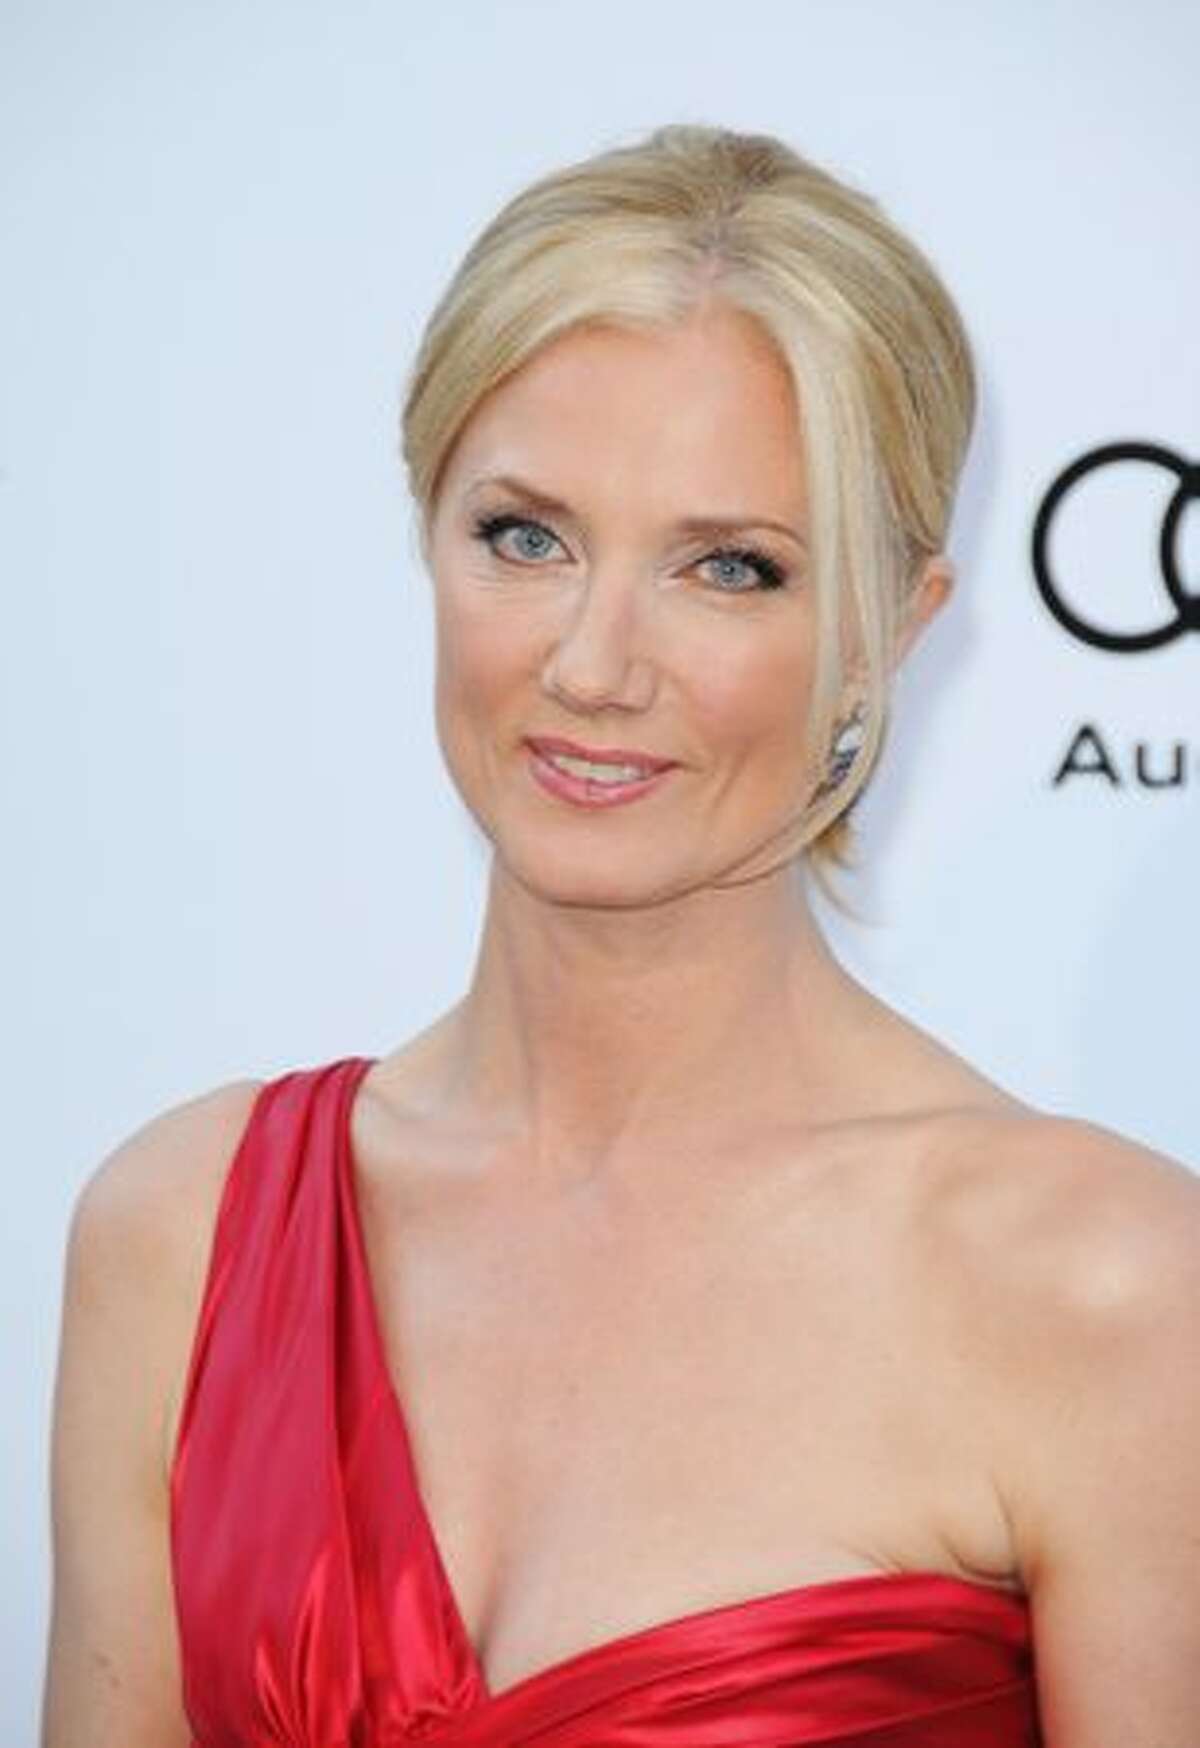 Actress Joely Richardson arrives at amfAR's Cinema Against AIDS 2010 benefit gala at the Hotel du Cap on May 20, 2010 in Antibes, France.